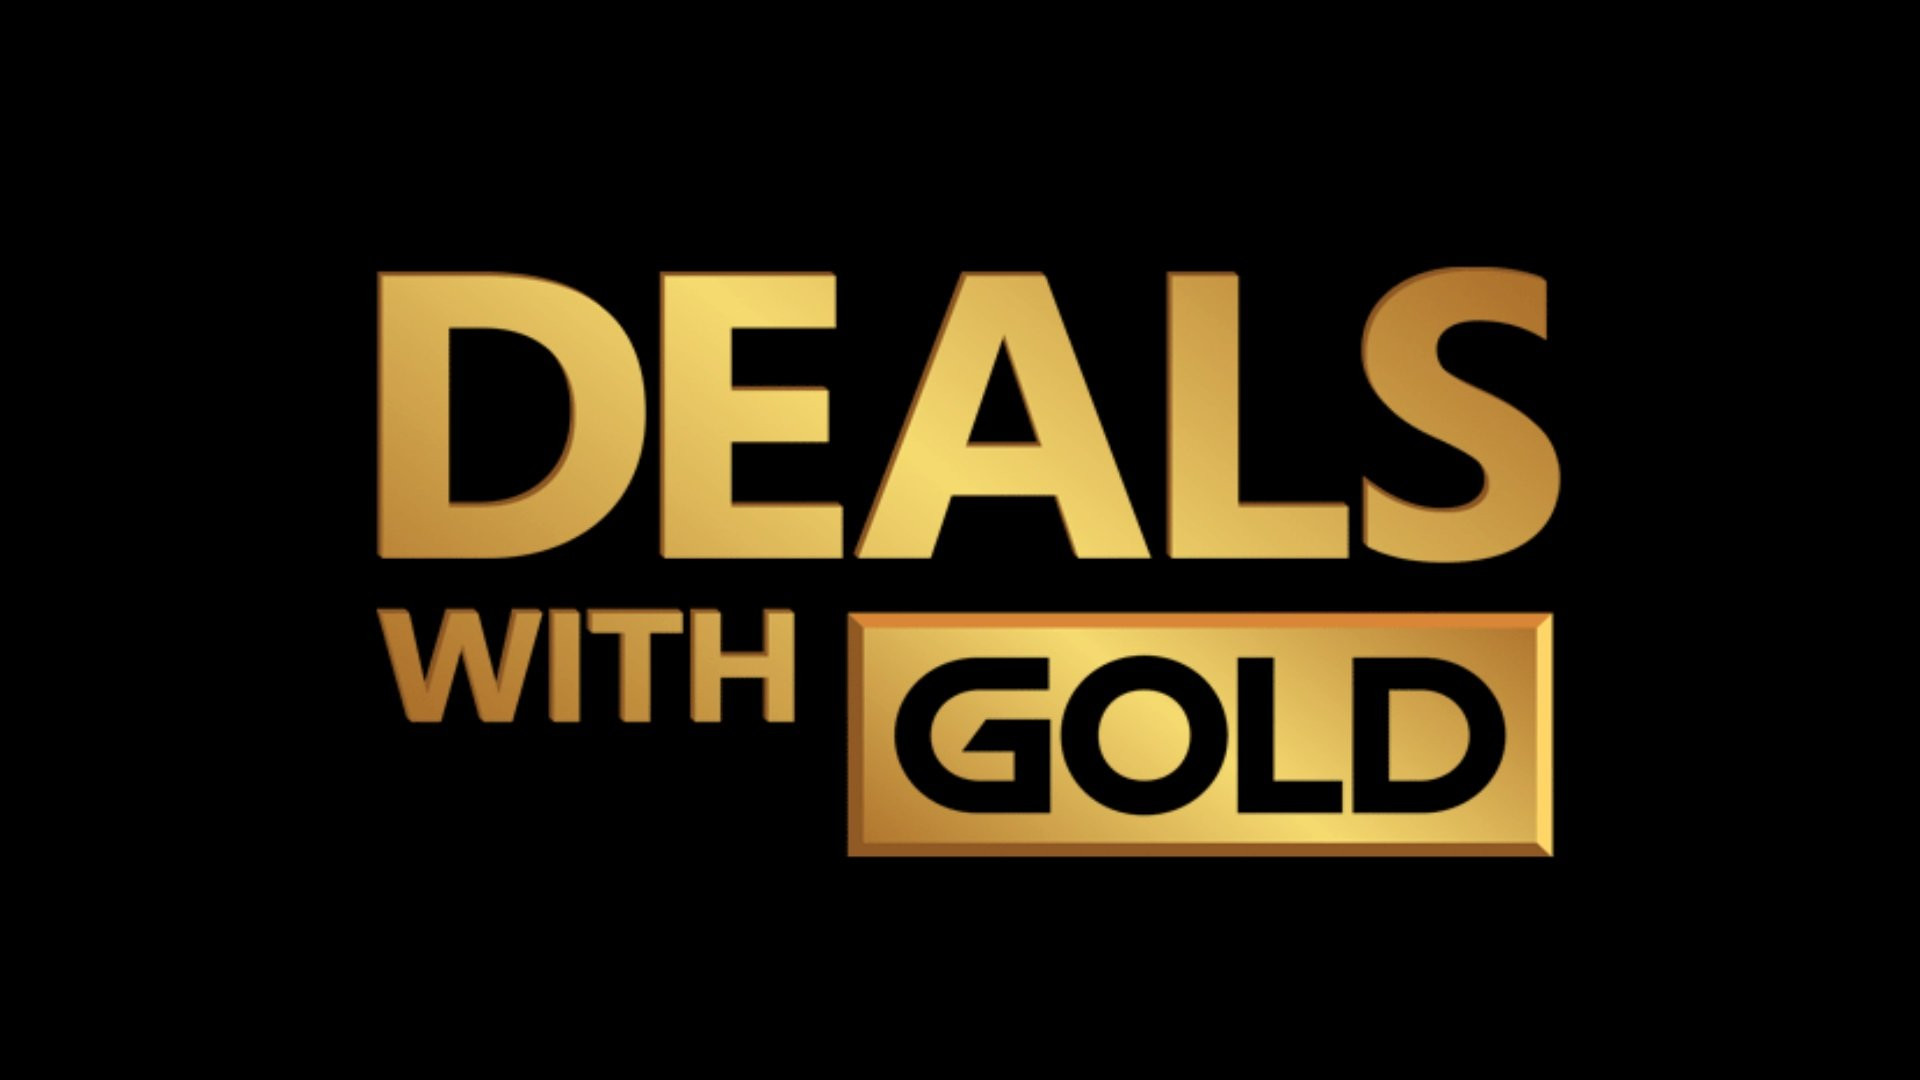 Deals with Gold semaine 27